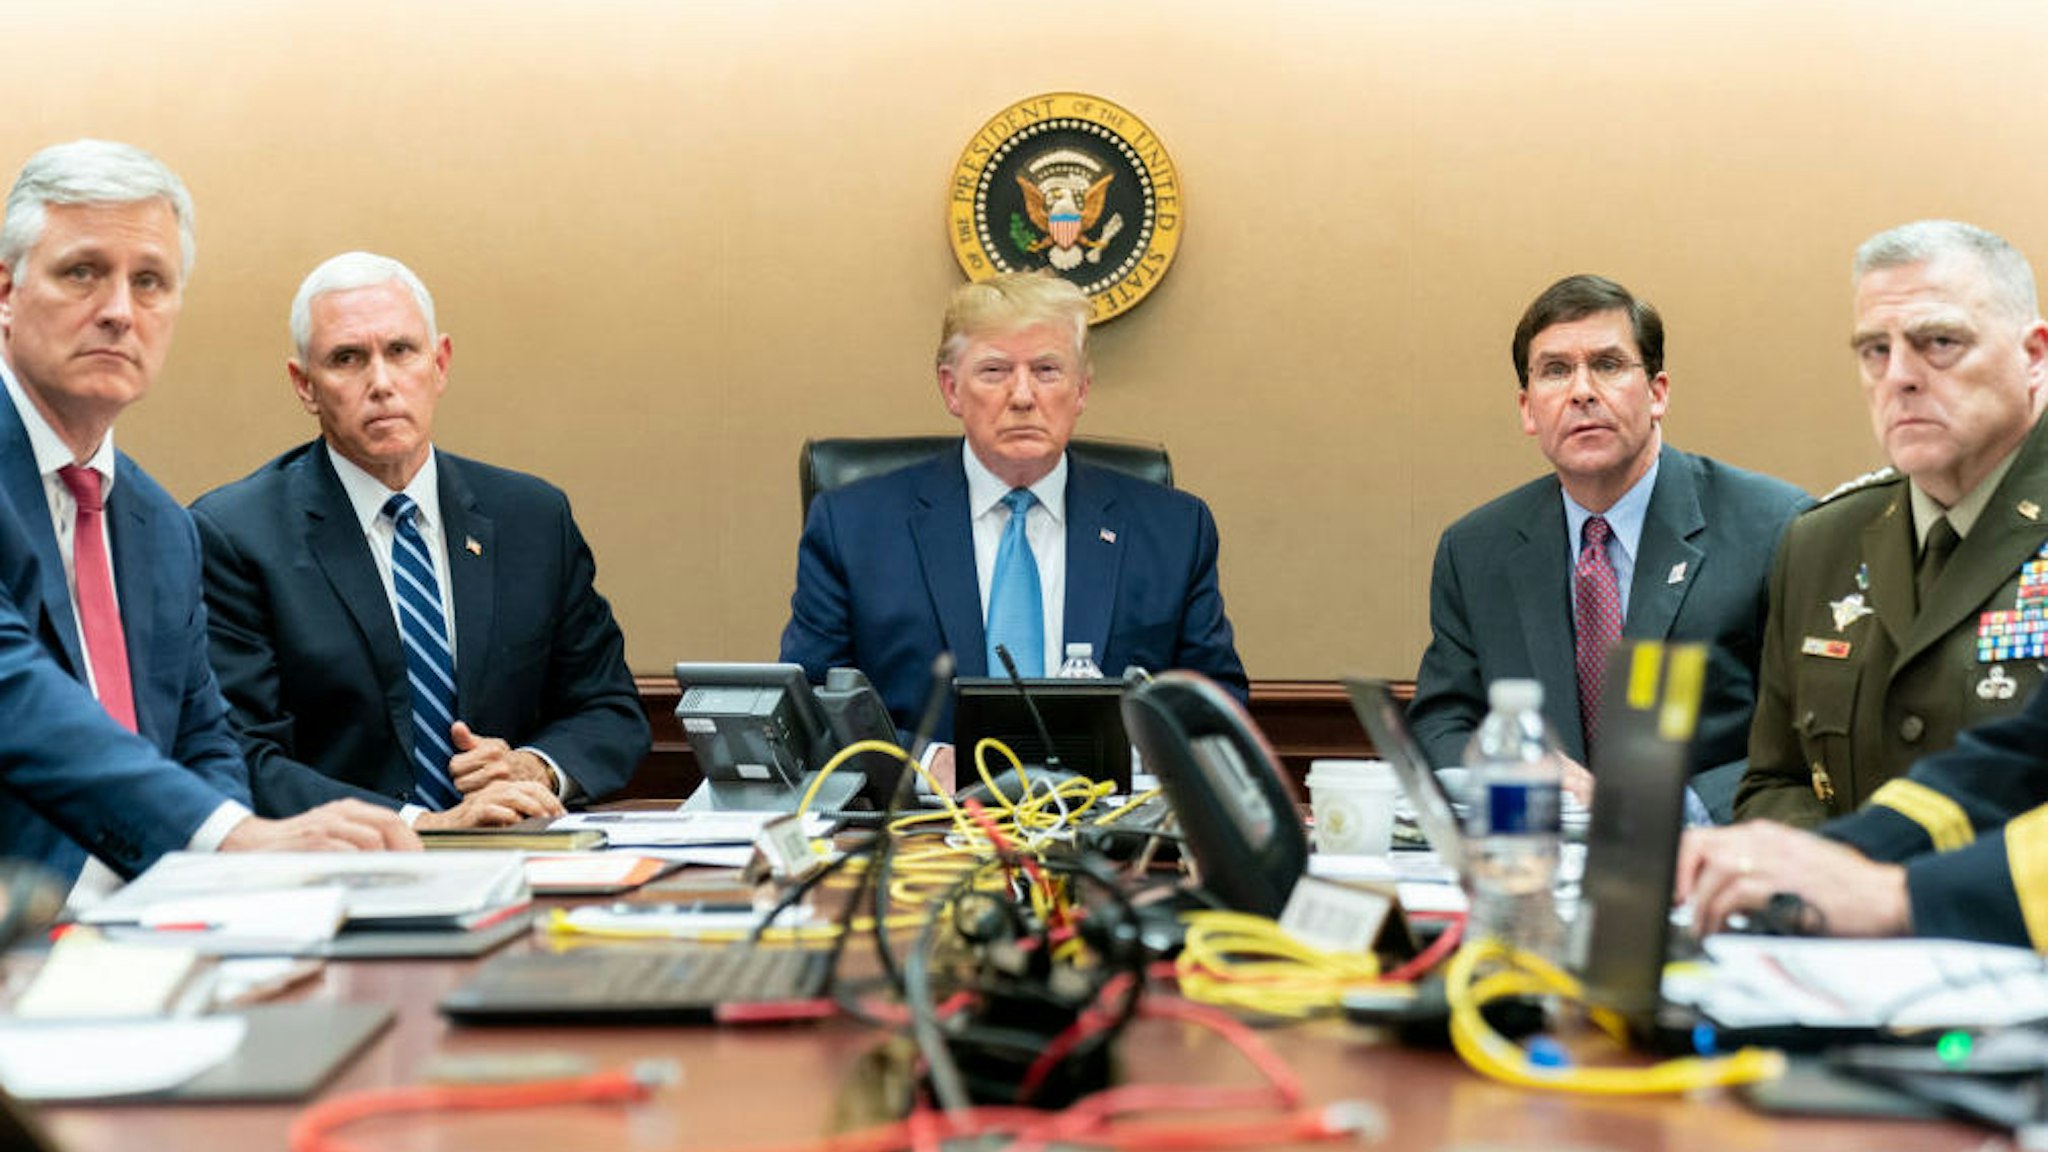 WASHINGTON, DC - OCTOBER 26: In this handout photo provided by the White House, President Donald J. Trump is joined by Vice President Mike Pence (2nd L), National Security Advisor Robert O‚ÄôBrien (L), Secretary of Defense Mark Esper (2nd R) and Chairman of the Joint Chiefs of Staff U.S. Army General Mark A. Milley in the Situation Room of the White House October 26, 2019 in Washington, DC. The President was monitoring developments as U.S. Special Operations forces close in on ISIS leader Abu Bakr al-Baghdadi‚Äôs compound in Syria with a mission to kill or capture the terrorist.